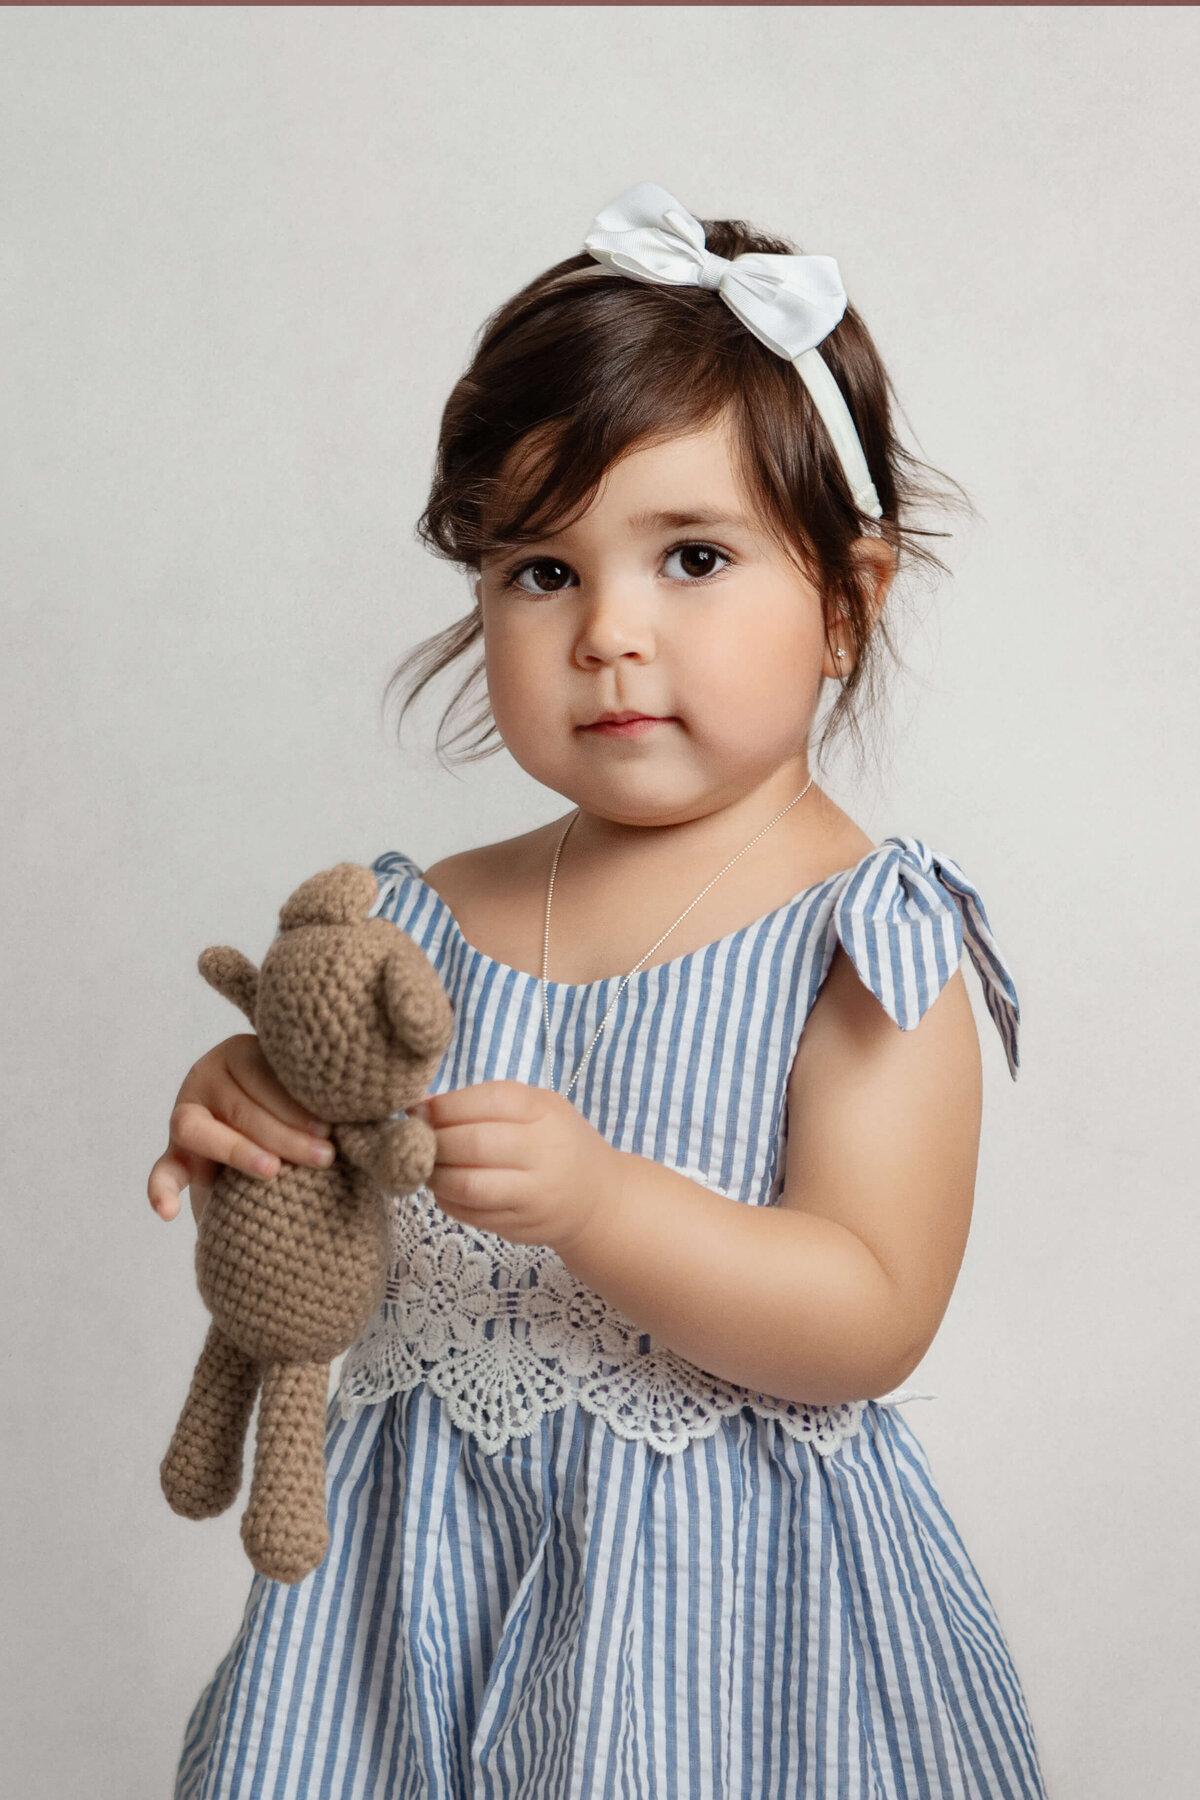 4 year old girl wearing a blue and white striped dress holding a brown bear